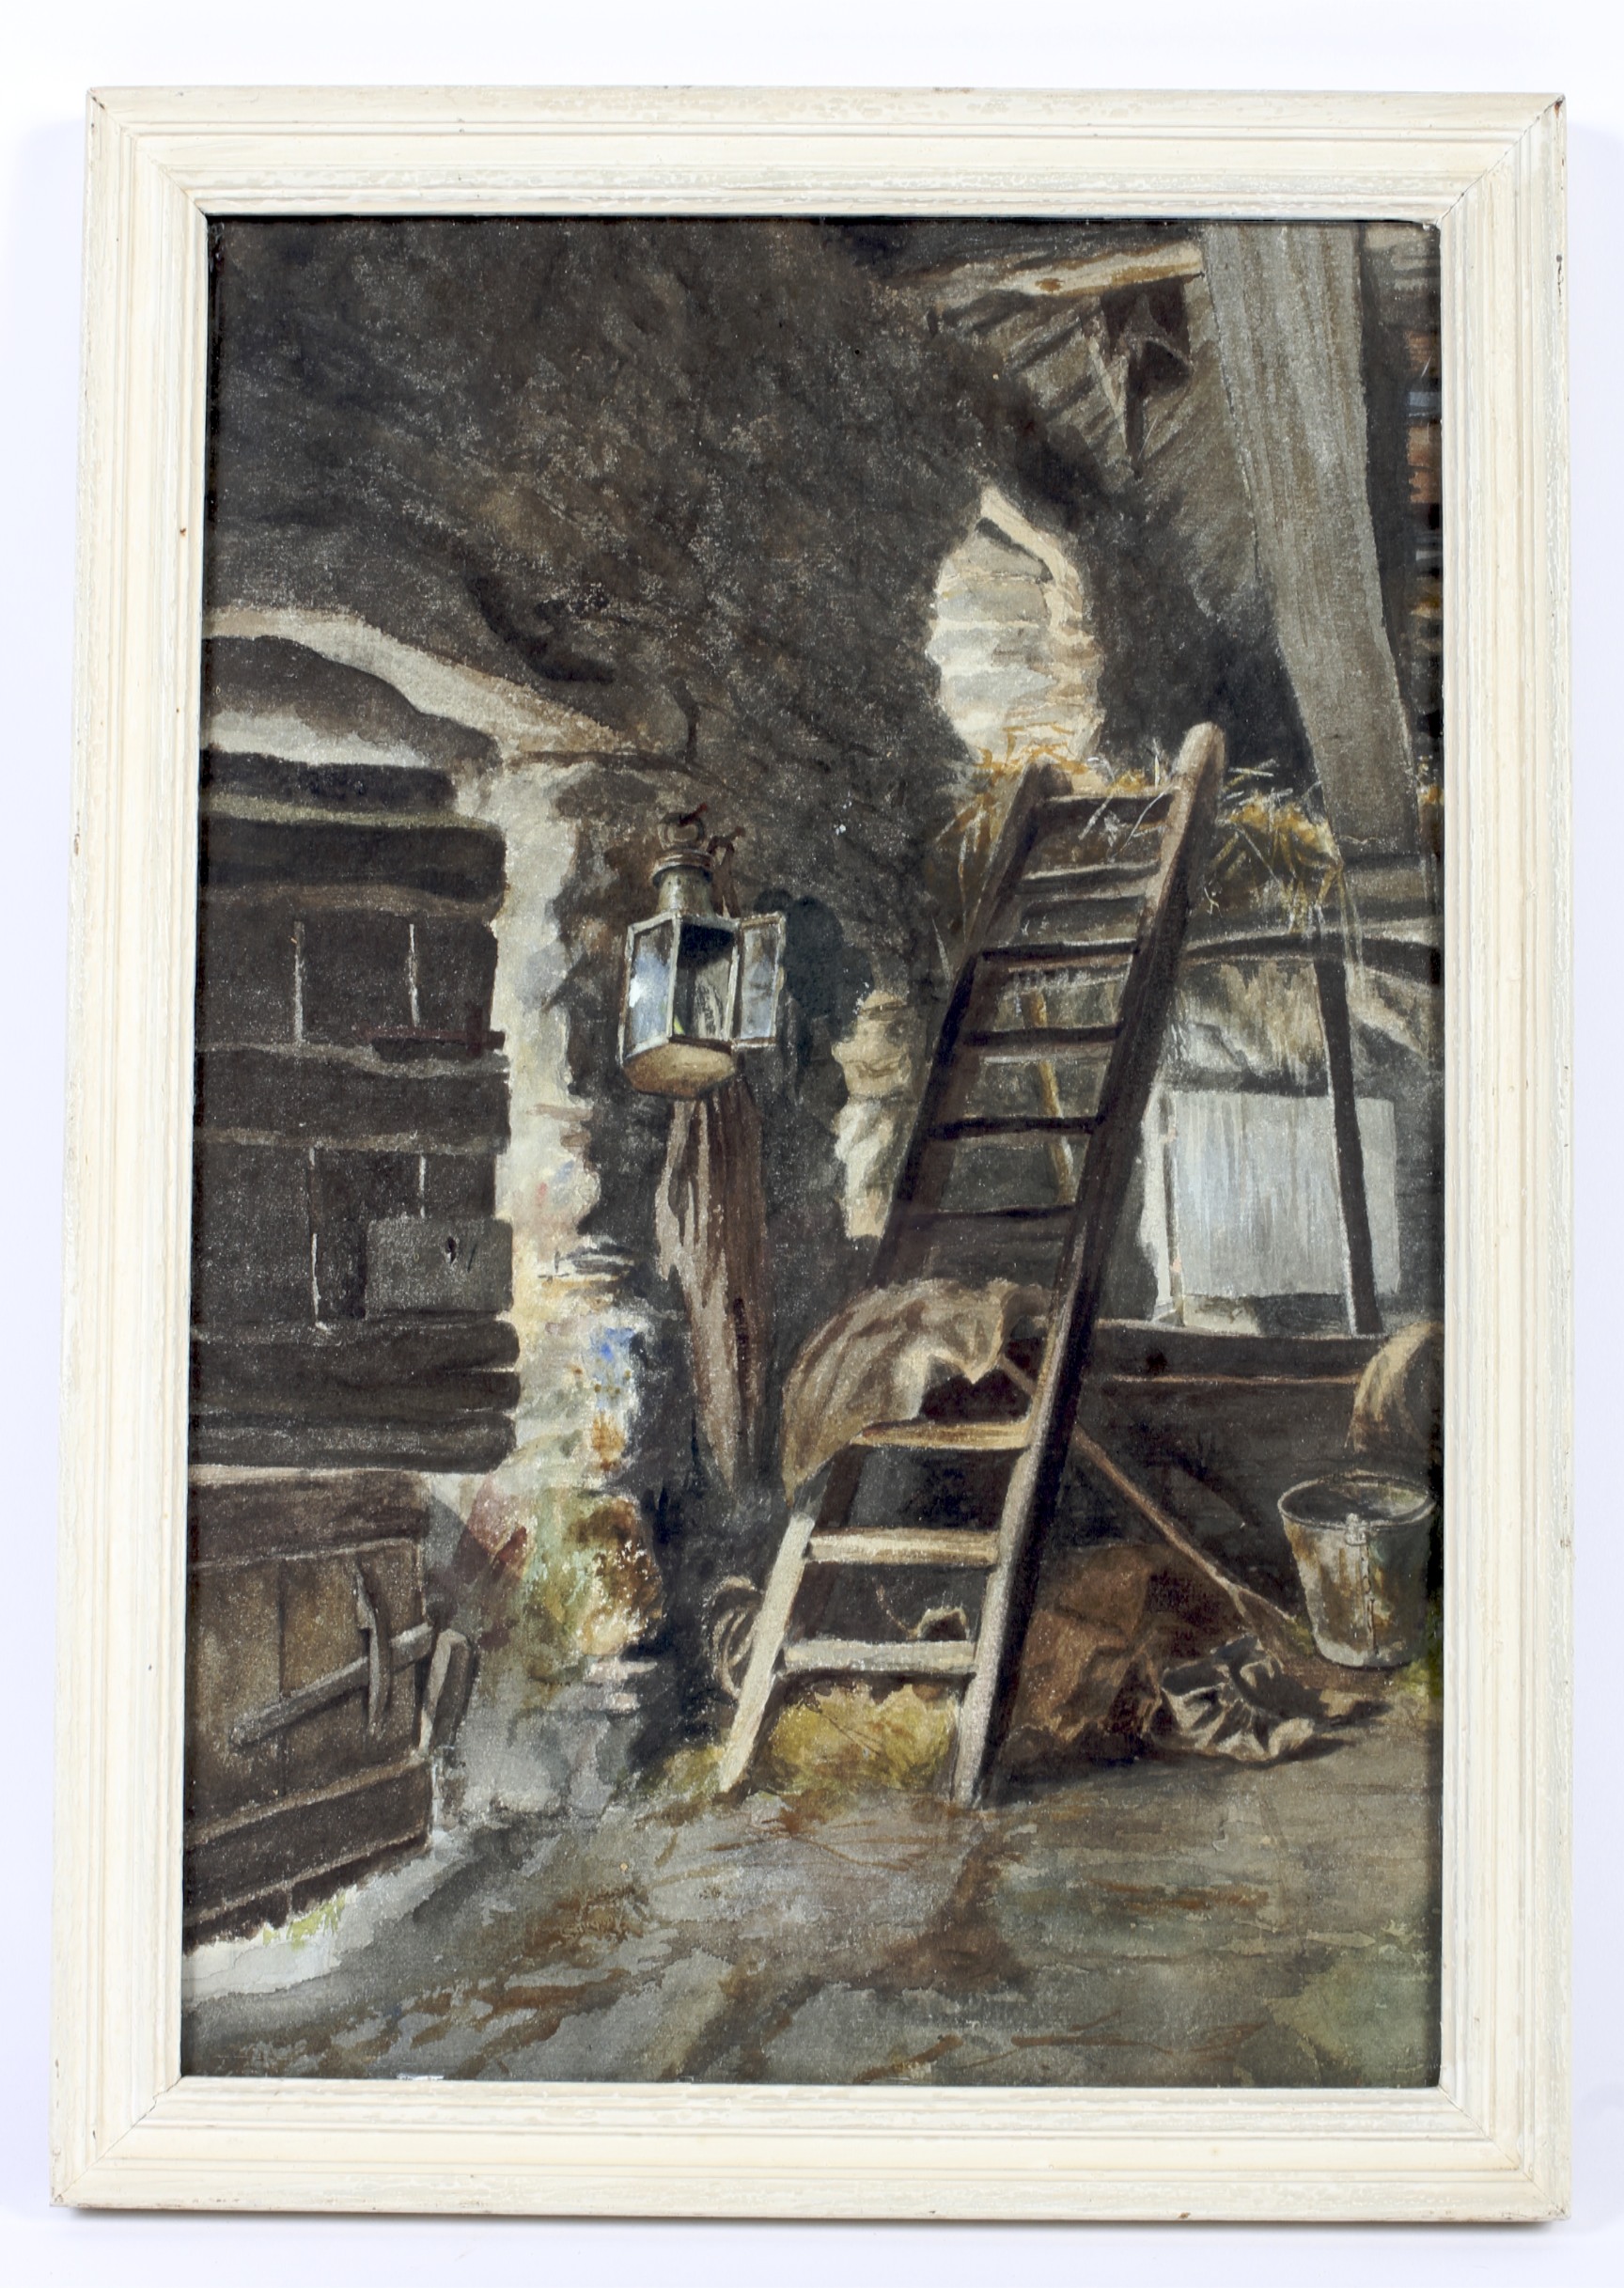 Attributed to ME Cooper RSA (act. 1882-88), a watercolour scene of a hayloft. 29.5cm X 44cm exc.